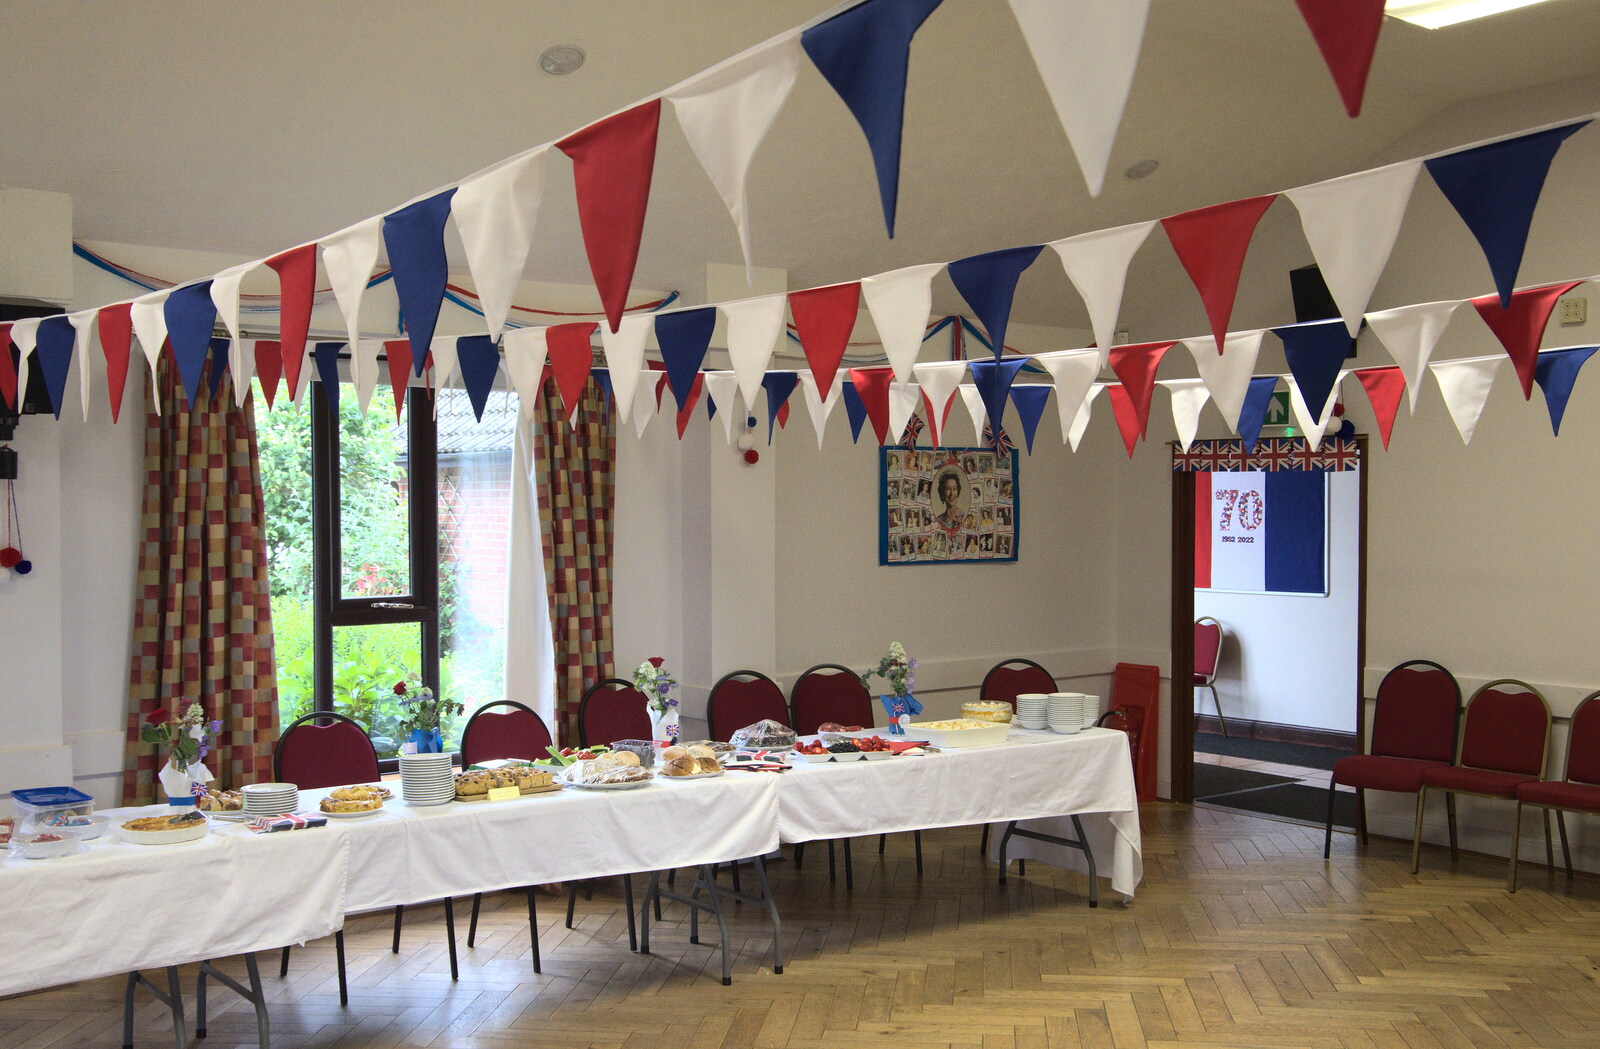 Platinum Jubilee Sunday in Palgrave, Brome and Coney Weston - 5th June 2022: Cakes and trifles are out in the hall